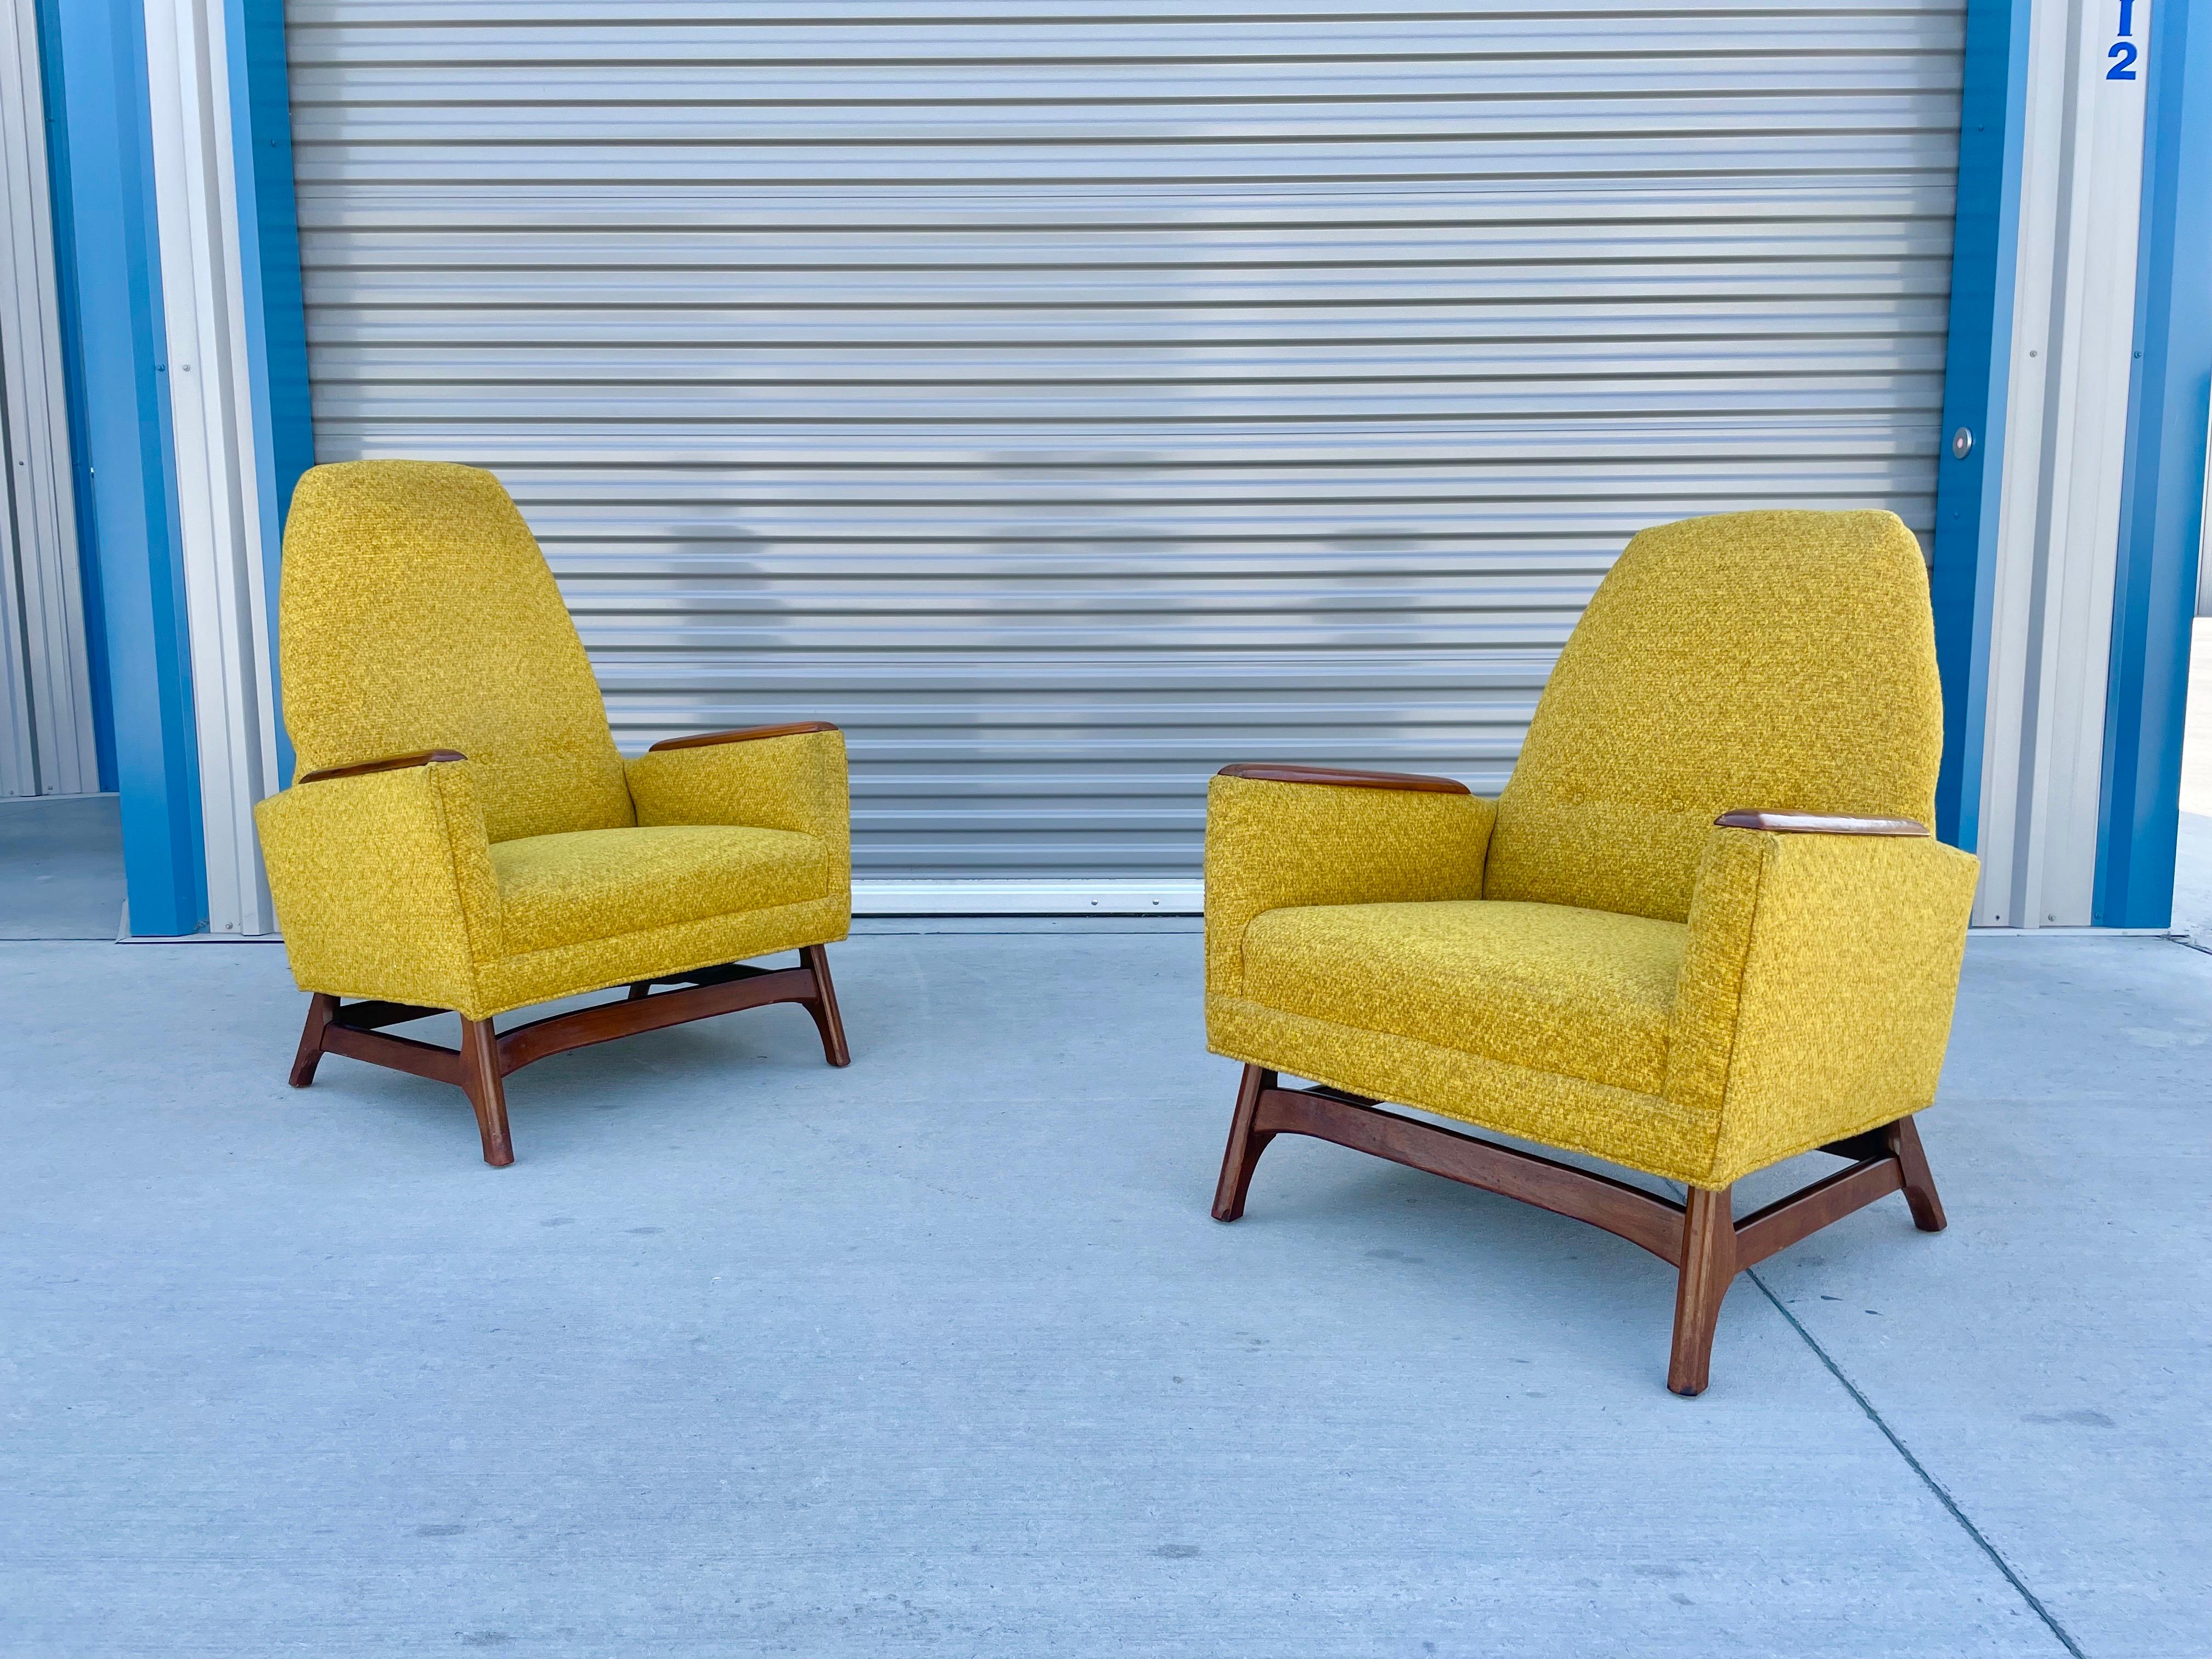 Midcentury walnut lounge chairs in the style of Adrian Pearsall. These chairs feature a vintage yellow upholstery with a sculpted solid walnut base and armrests. These chairs are price great for anyone who wants to reupholster them or use them as is.